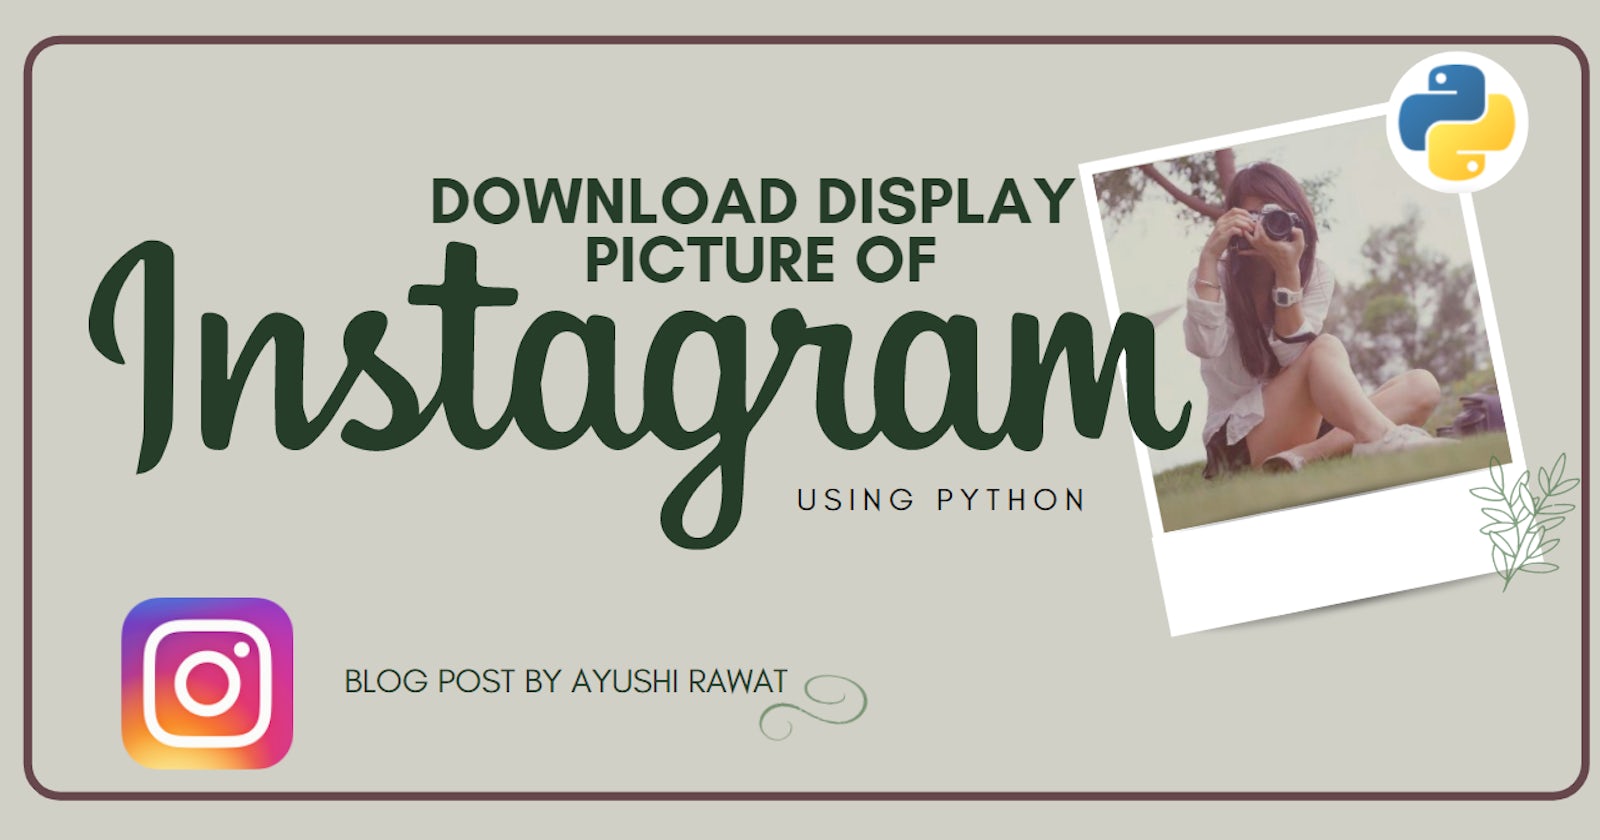 Download Display Picture of an Instagram Account Using Python